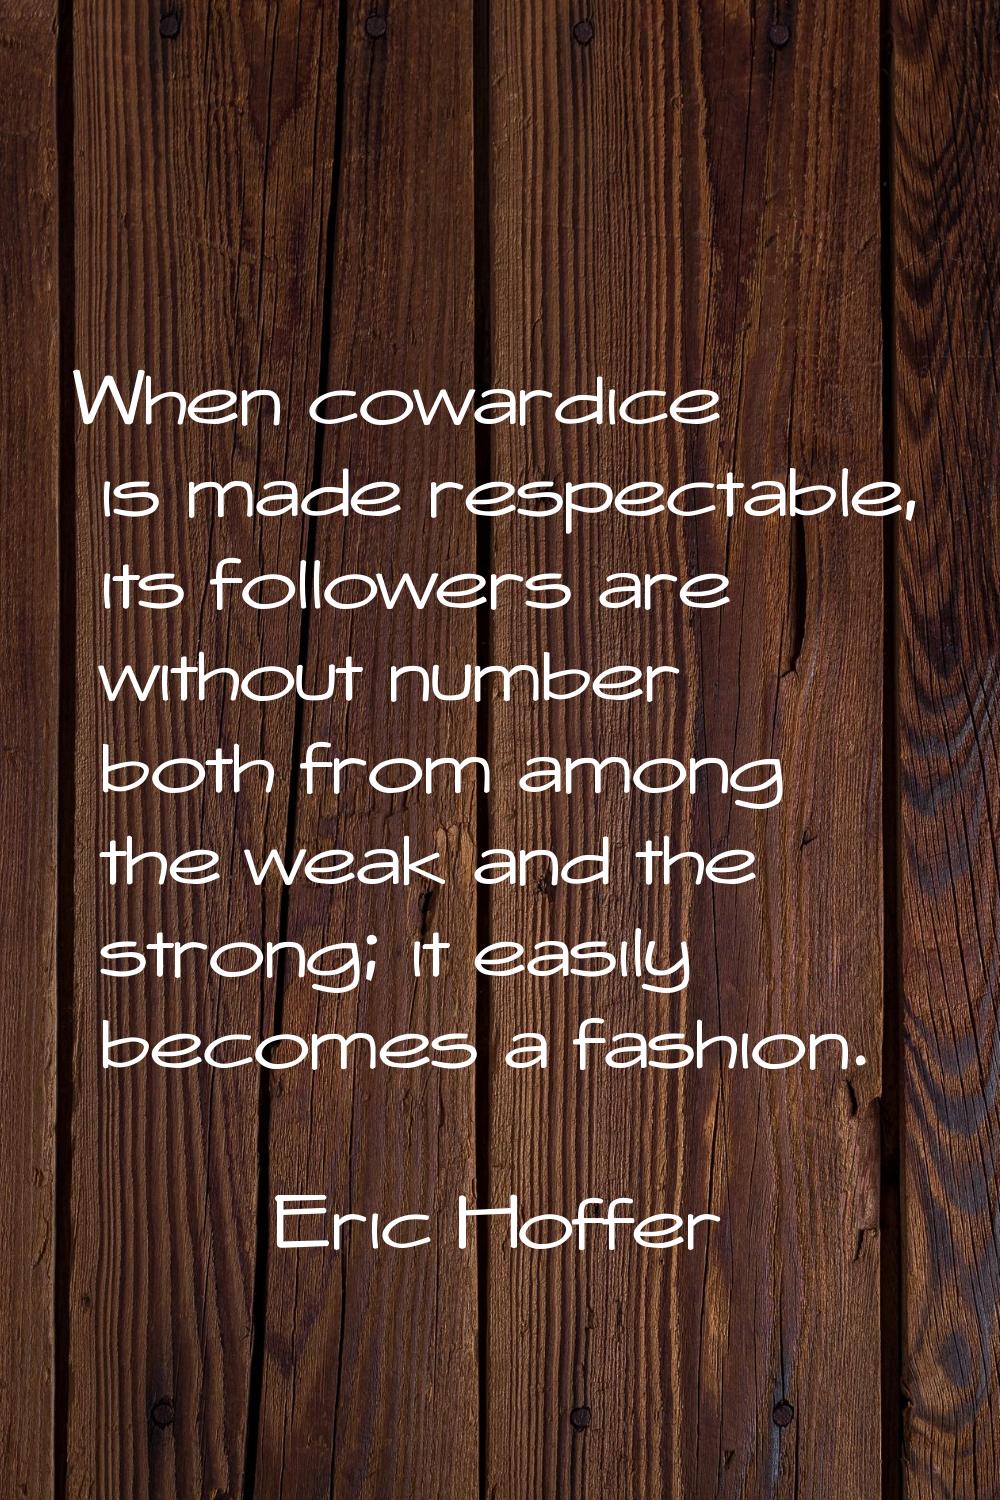 When cowardice is made respectable, its followers are without number both from among the weak and t